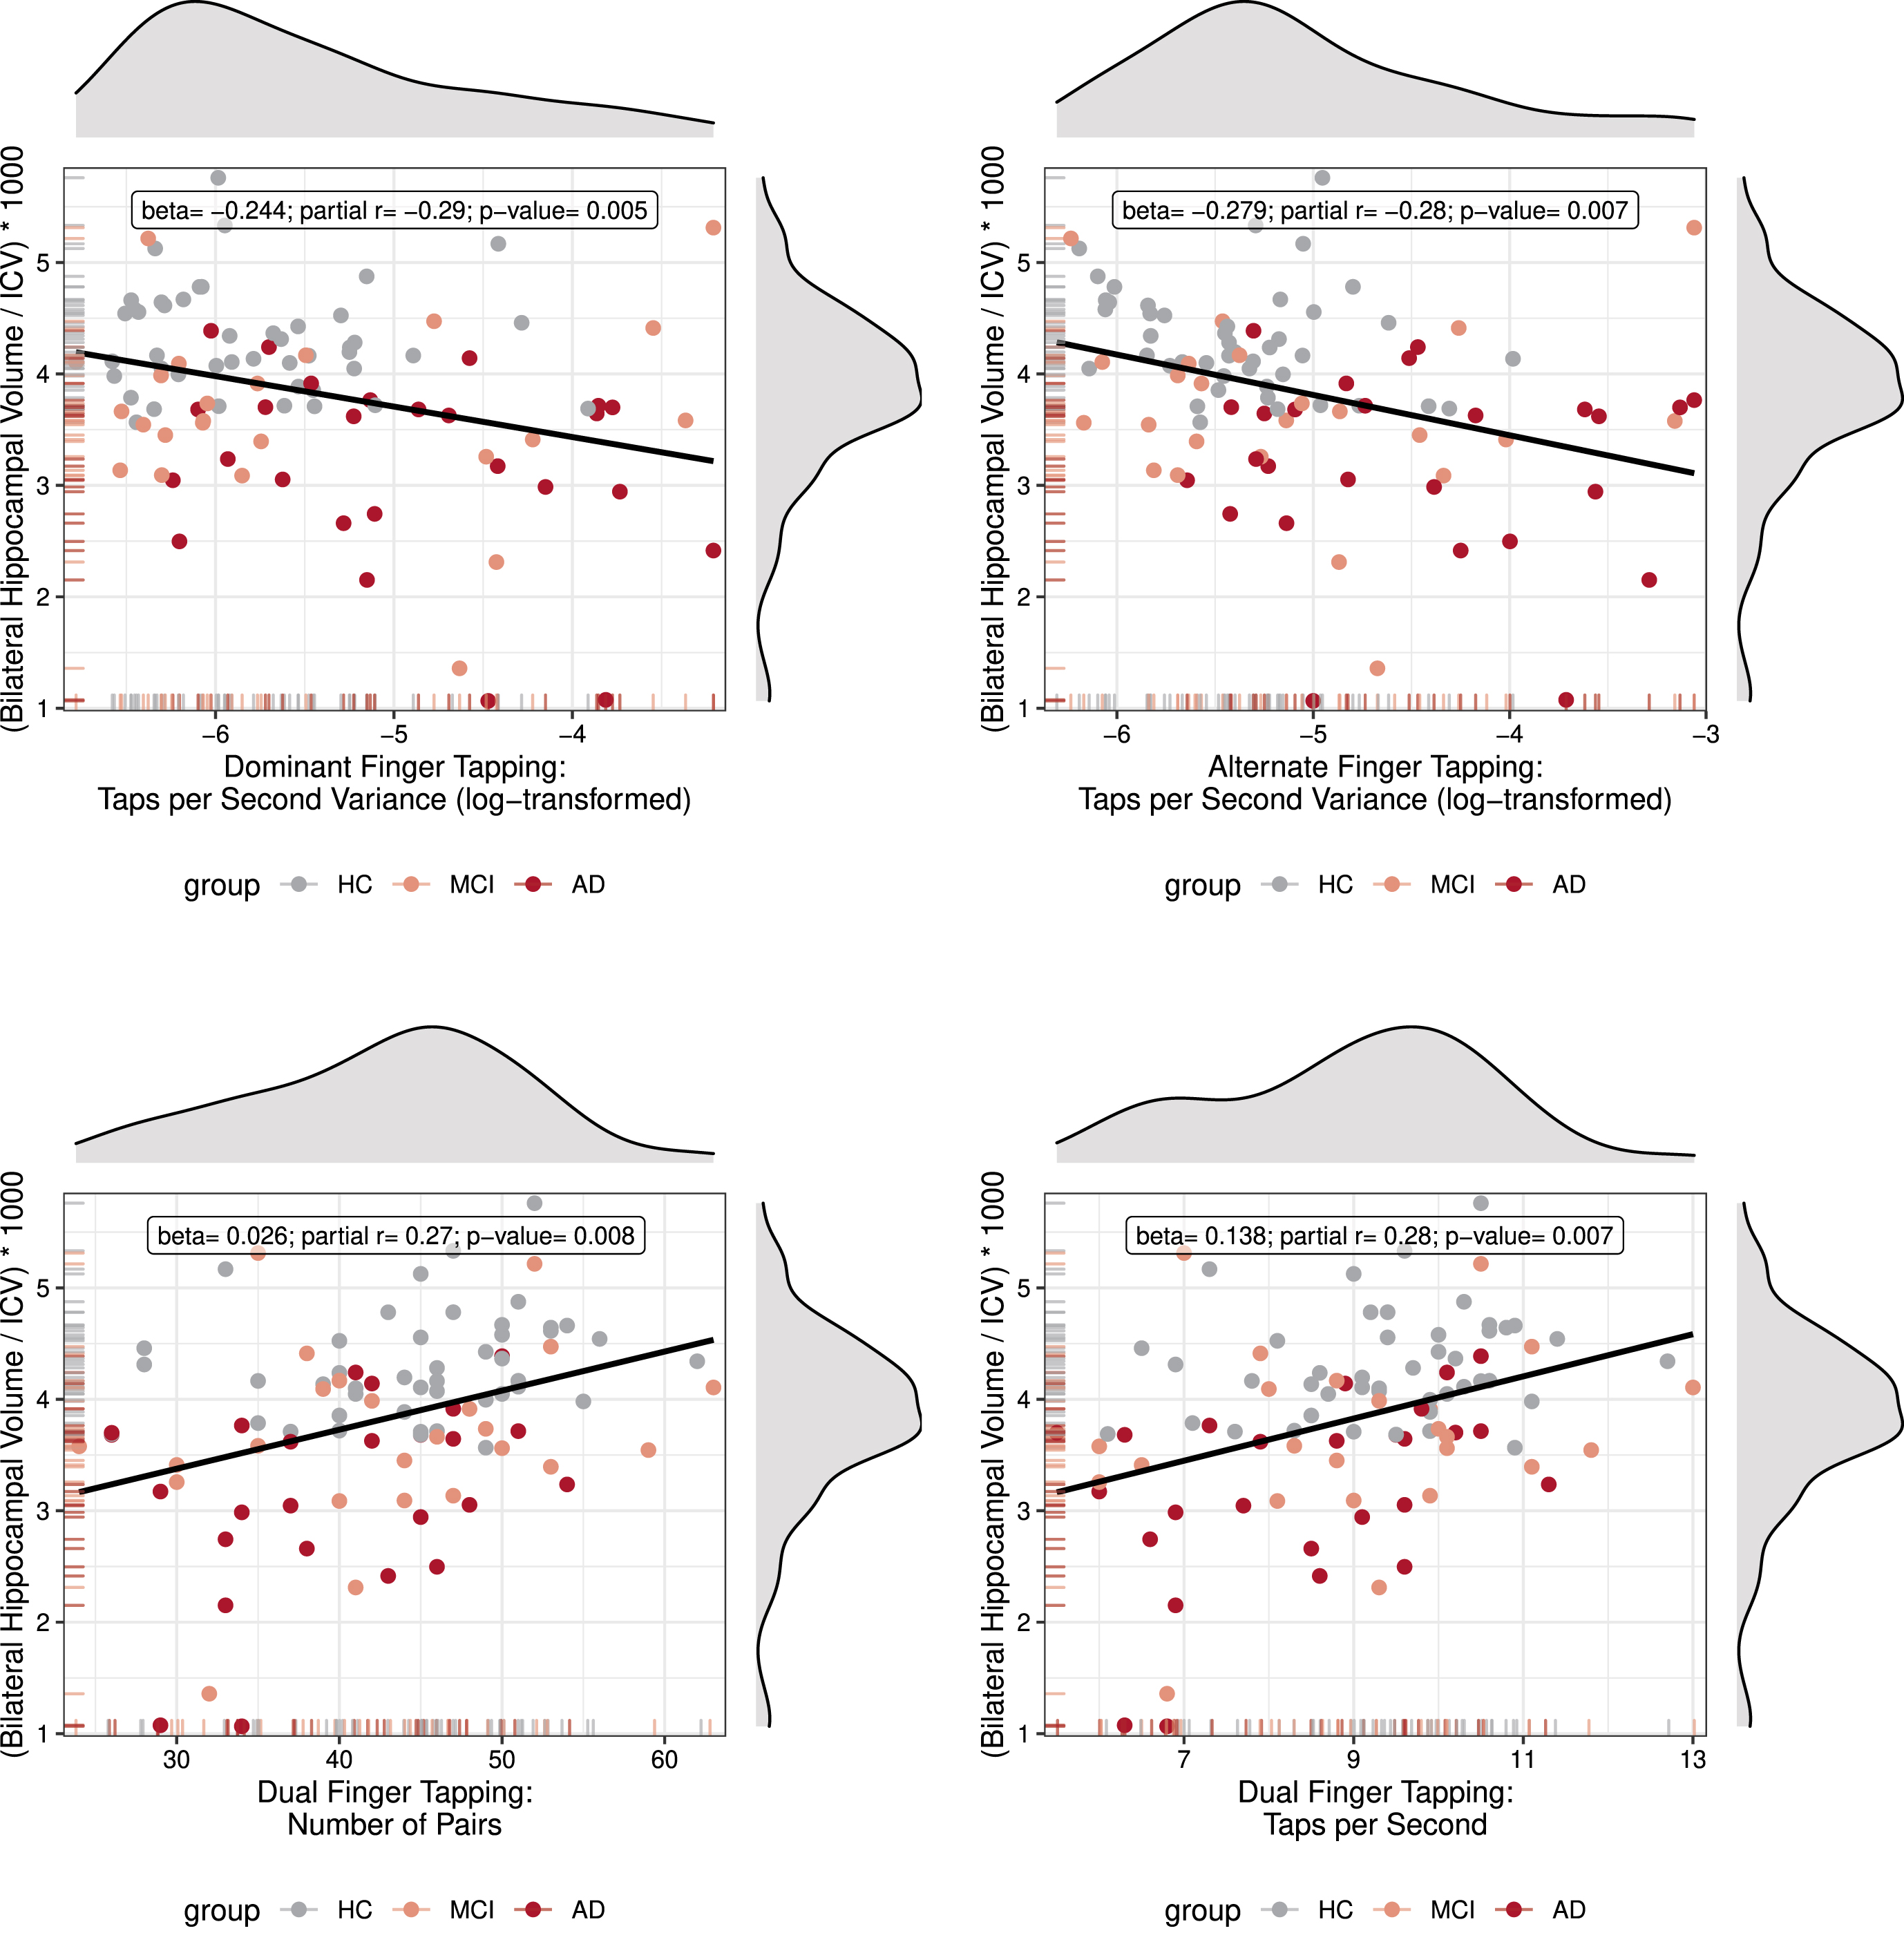 Correlations between Hippocampal Volume and Tapping Performance. Scatter plots with density curves (on top and on the right side of each graph) and carpet plots (on the left and bottom side of axis) for both variables. Each graph shows the individual observations color coded for group, and a regression line. Inside the graph is a text box with summary statistics of the partial correlation (adjusted for age and sex) and regression, as well as the p-value for the analysis. Note that, even though individual values are color coded for group, the statistics were calculated for the entire collapsed sample.